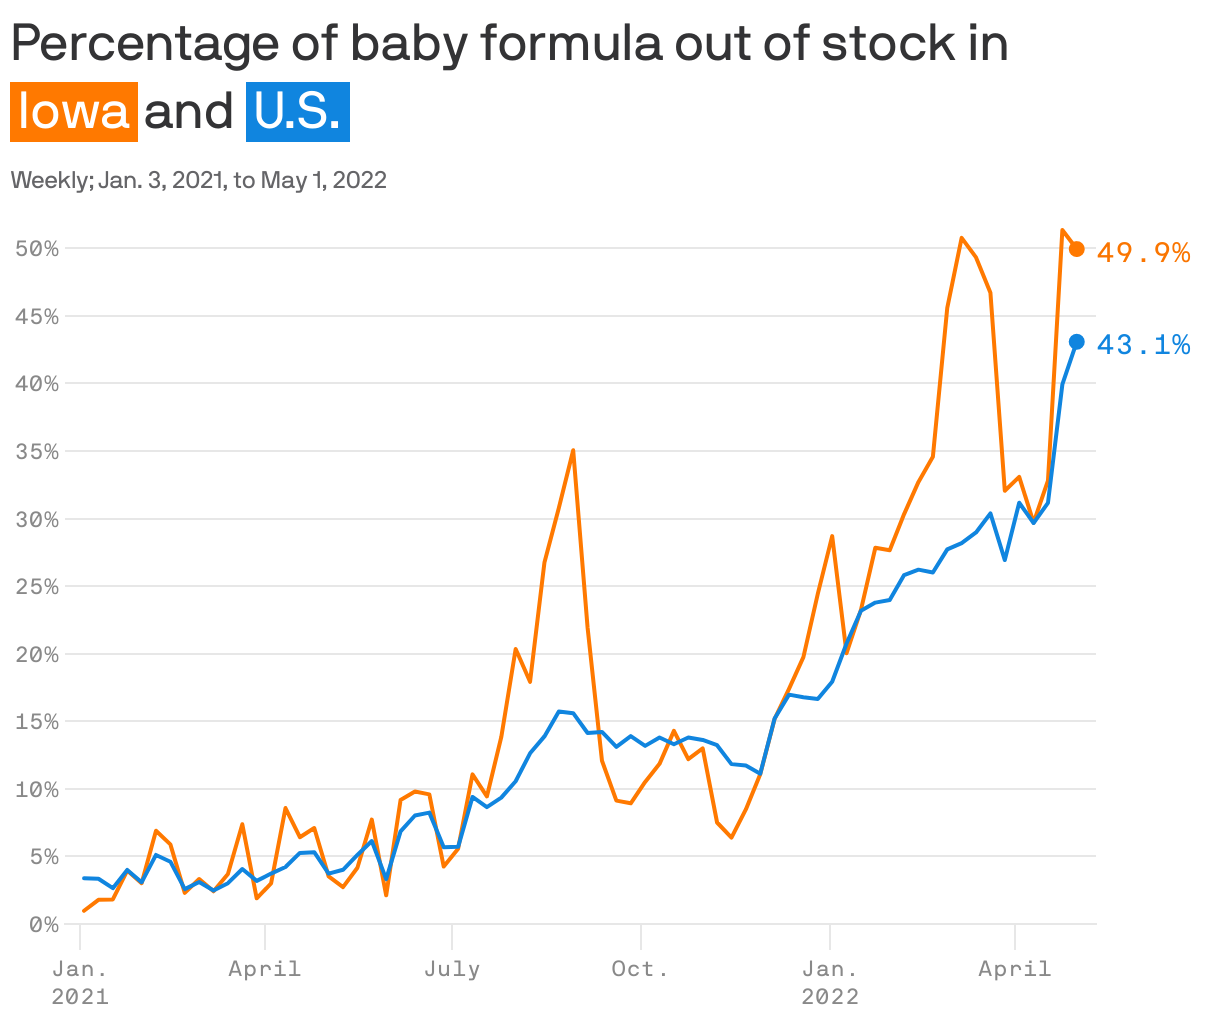 Percentage of baby formula out of stock in <span style="color: white; background-color:#ff7900; padding: 2px 4px; margin-right:3px; white-space: nowrap;">Iowa</span>and <span style="color: white; background-color:#1085df; padding: 2px 4px; margin-right:3px; white-space: nowrap;">U.S.</span>